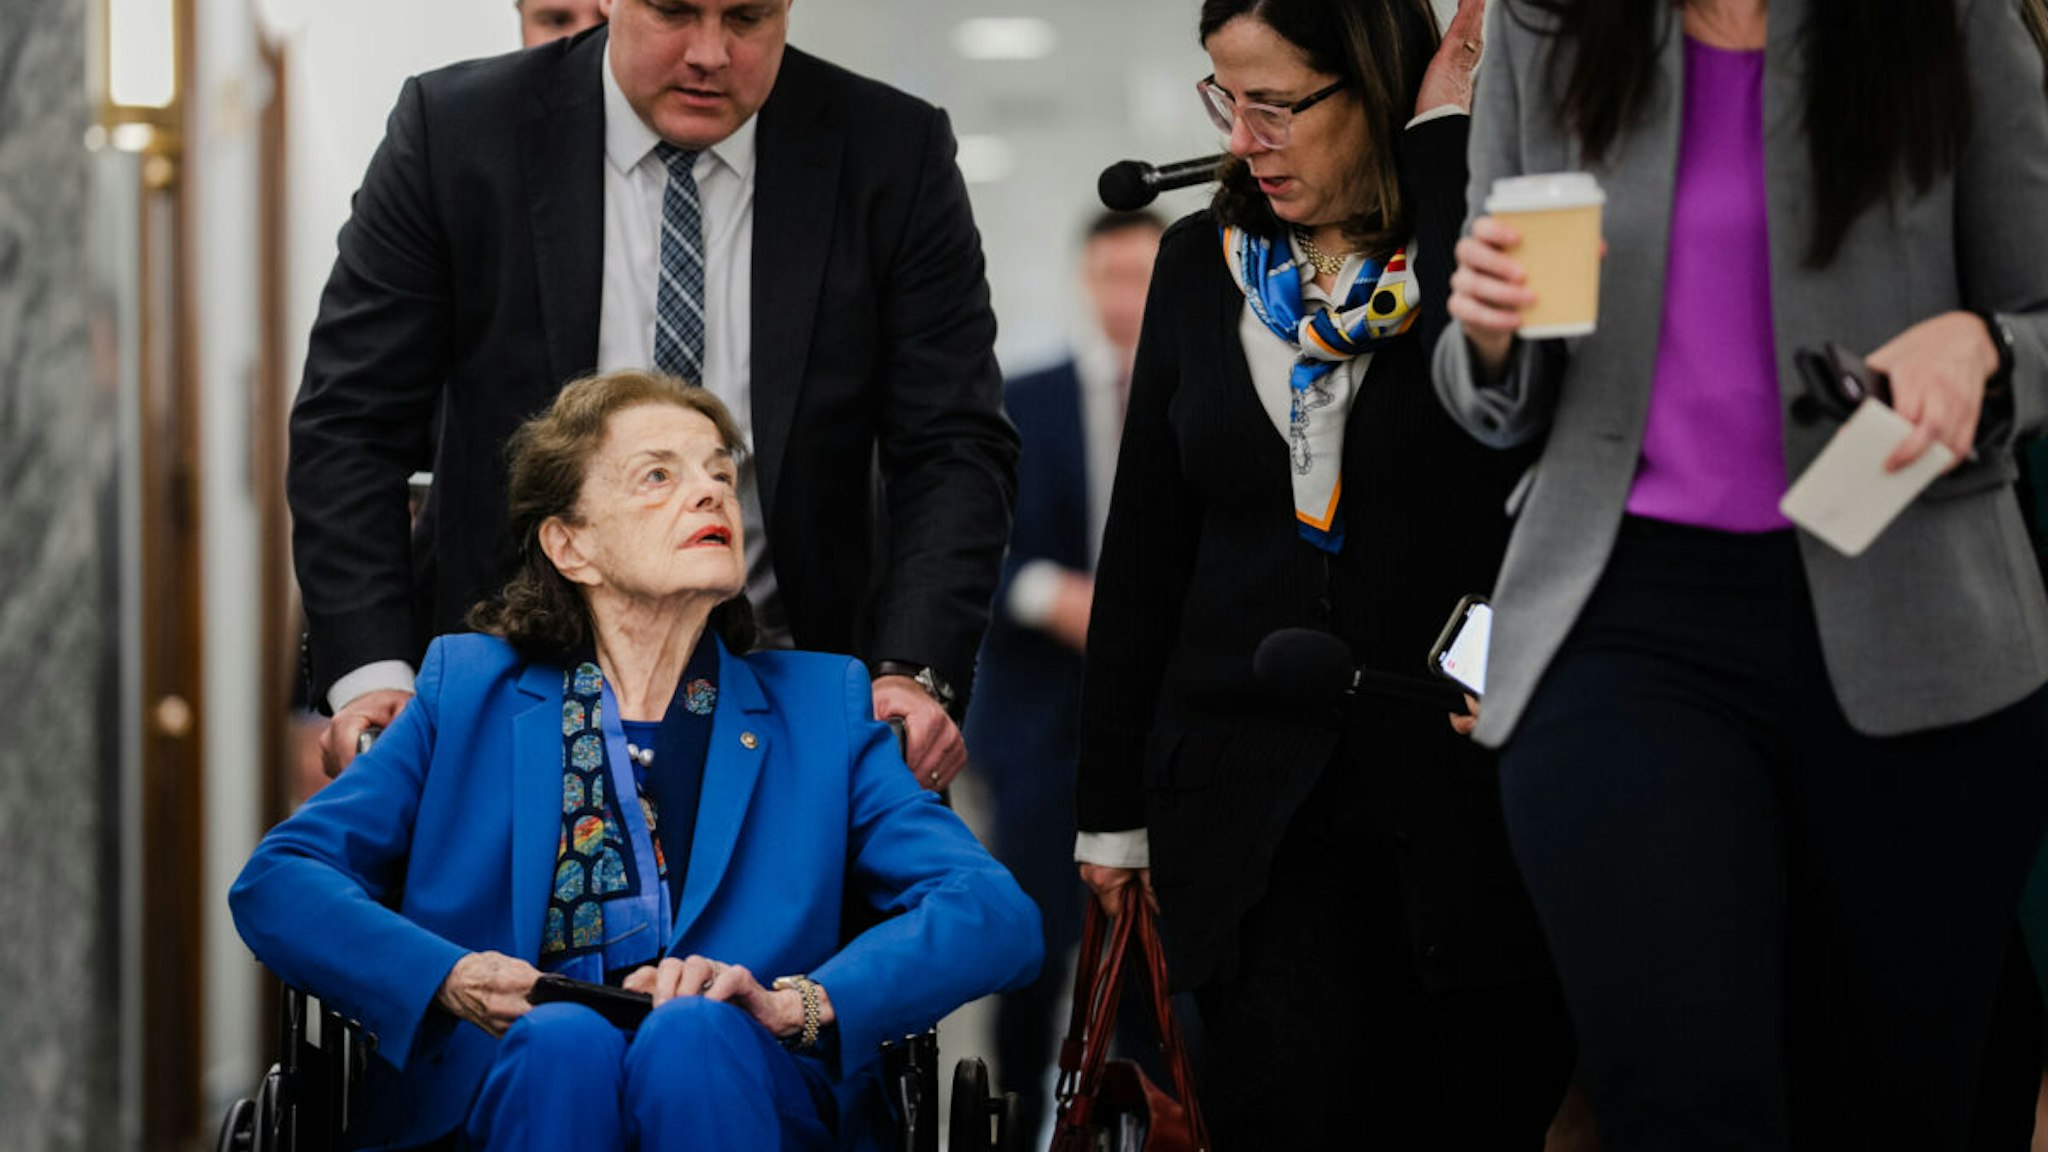 Sen. Dianne Feinstein (D-CA) talks with Nancy Corinne Prowda, second from right, daughter of Rep. Nancy Pelosi (D-CA) as Sen. Feinstein, surrounded by staff departs a Senate Judiciary Business Meeting at the Senate Dirksen Office Building on Capitol Hill on Thursday, May 18, 2023 in Washington, DC.